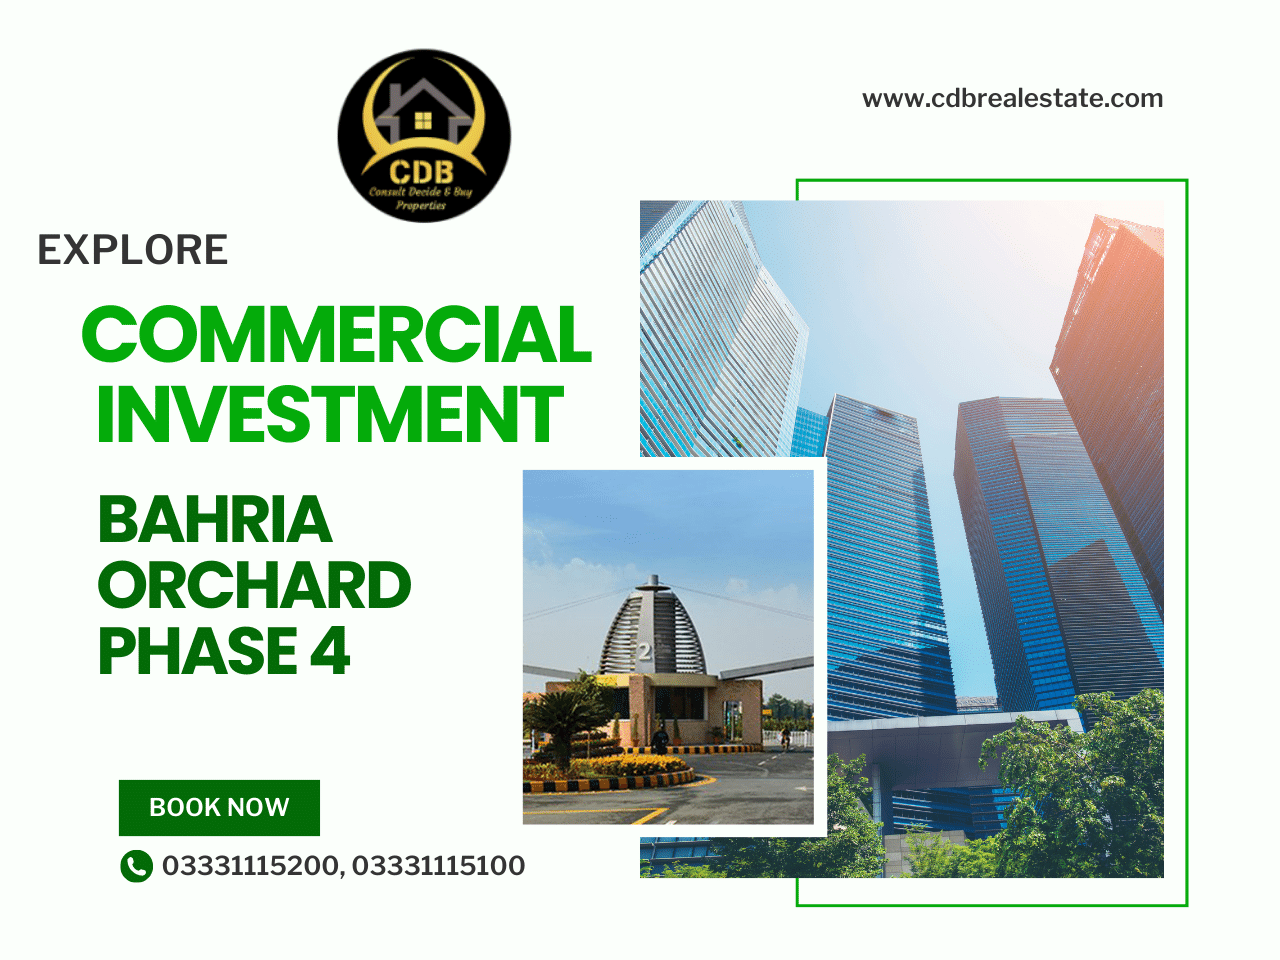 Bahria Orchard Phase 4 Commercial Investment